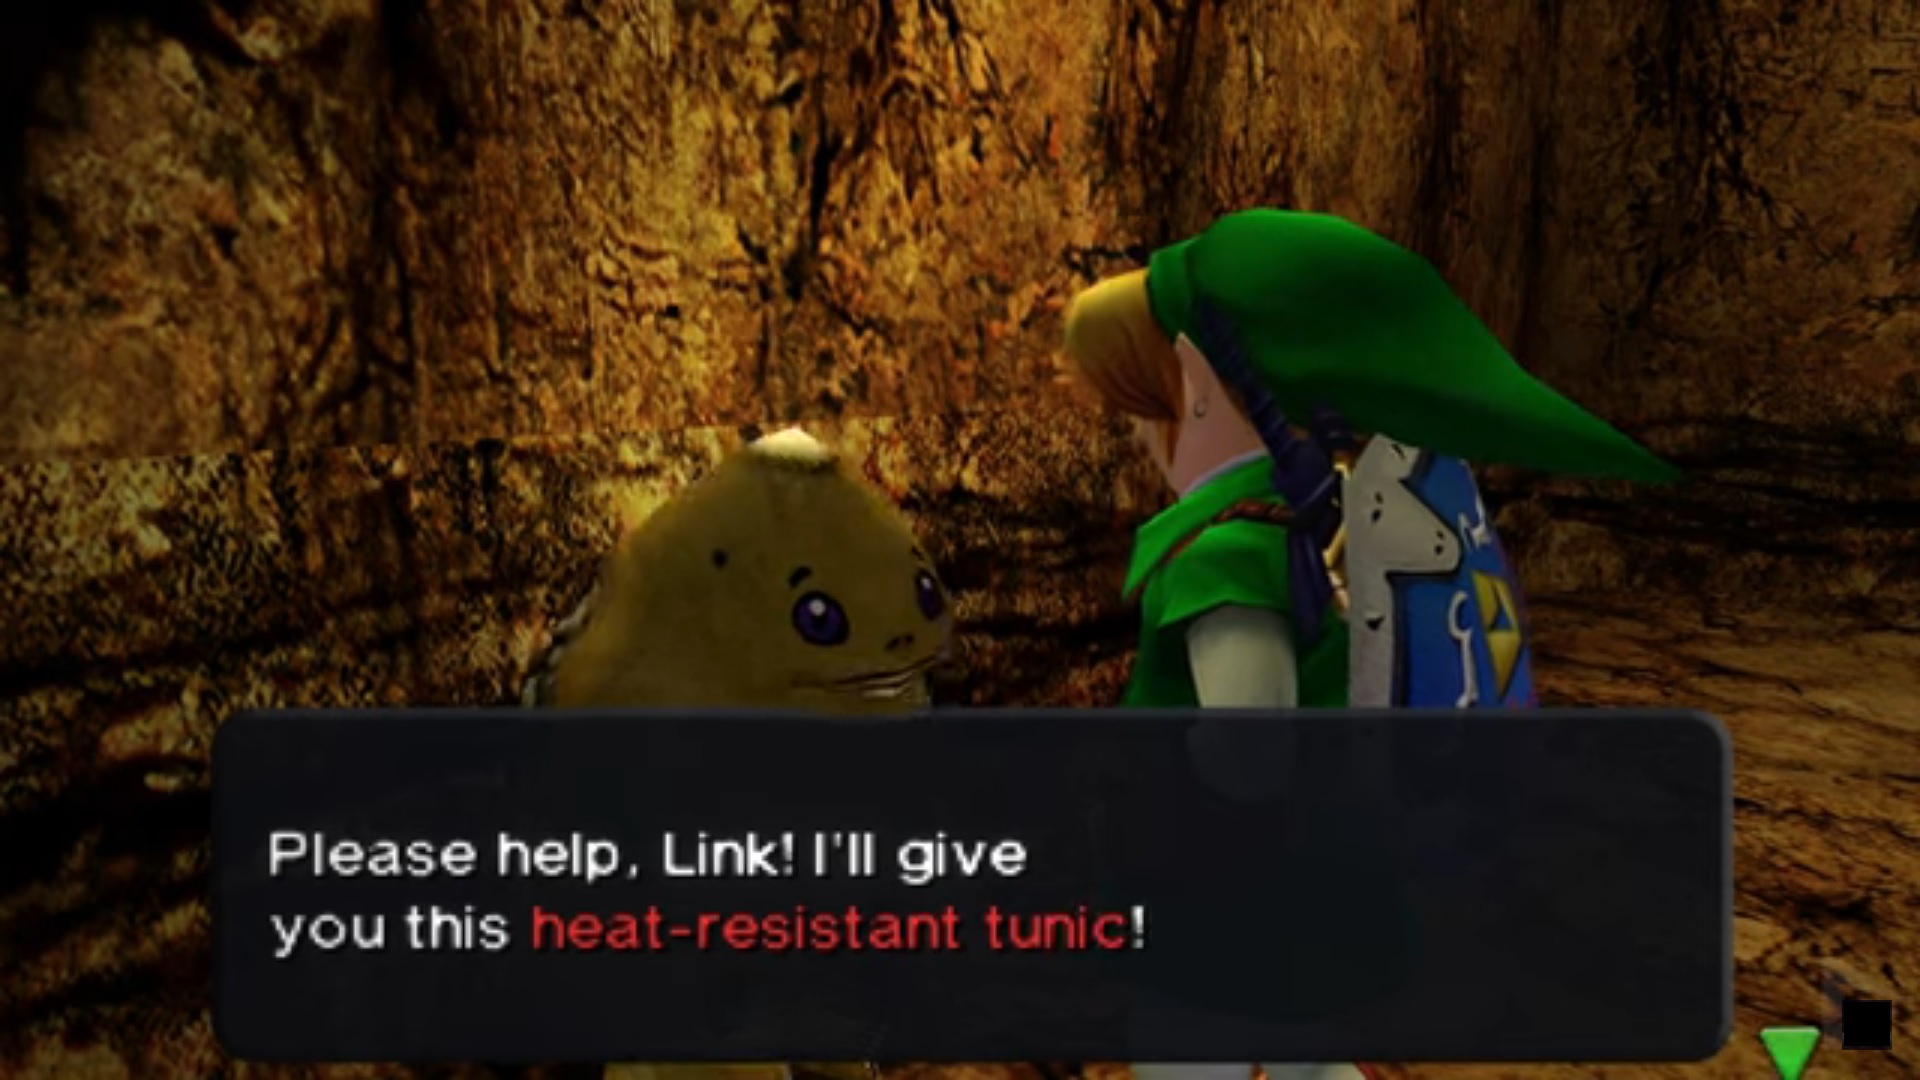 Ocarina of Time is frustrating as hell to navigate, even with Navi